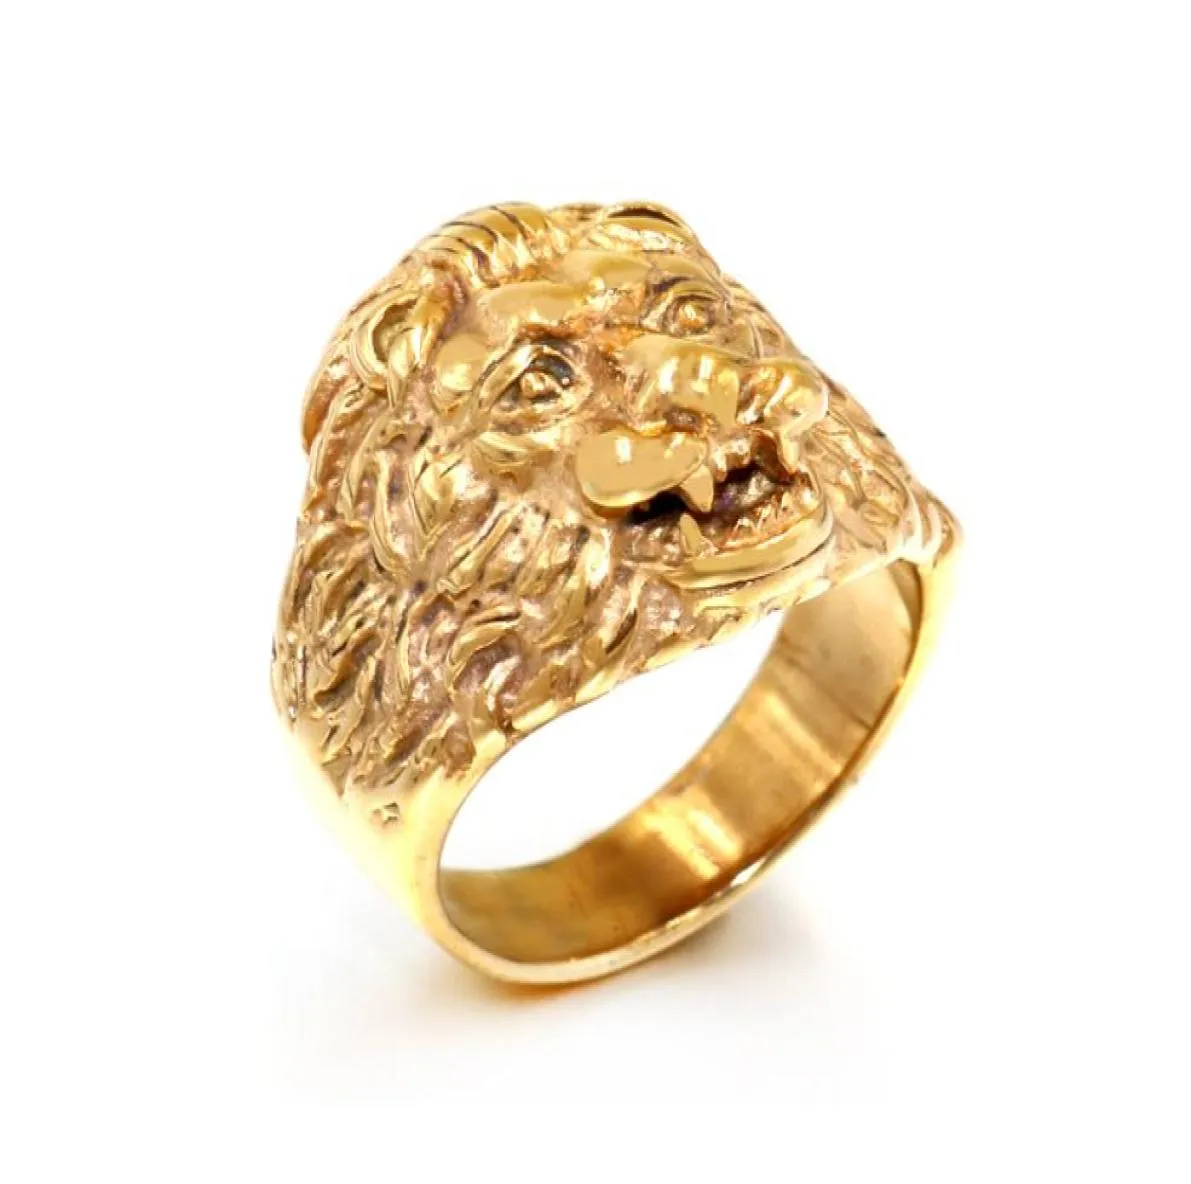 Male Fashion High Quality Animal stone ring Men039s Lion Rings Stainless Steel Rock Punk Rings Men Lion039s head Gold Jewelr6570750